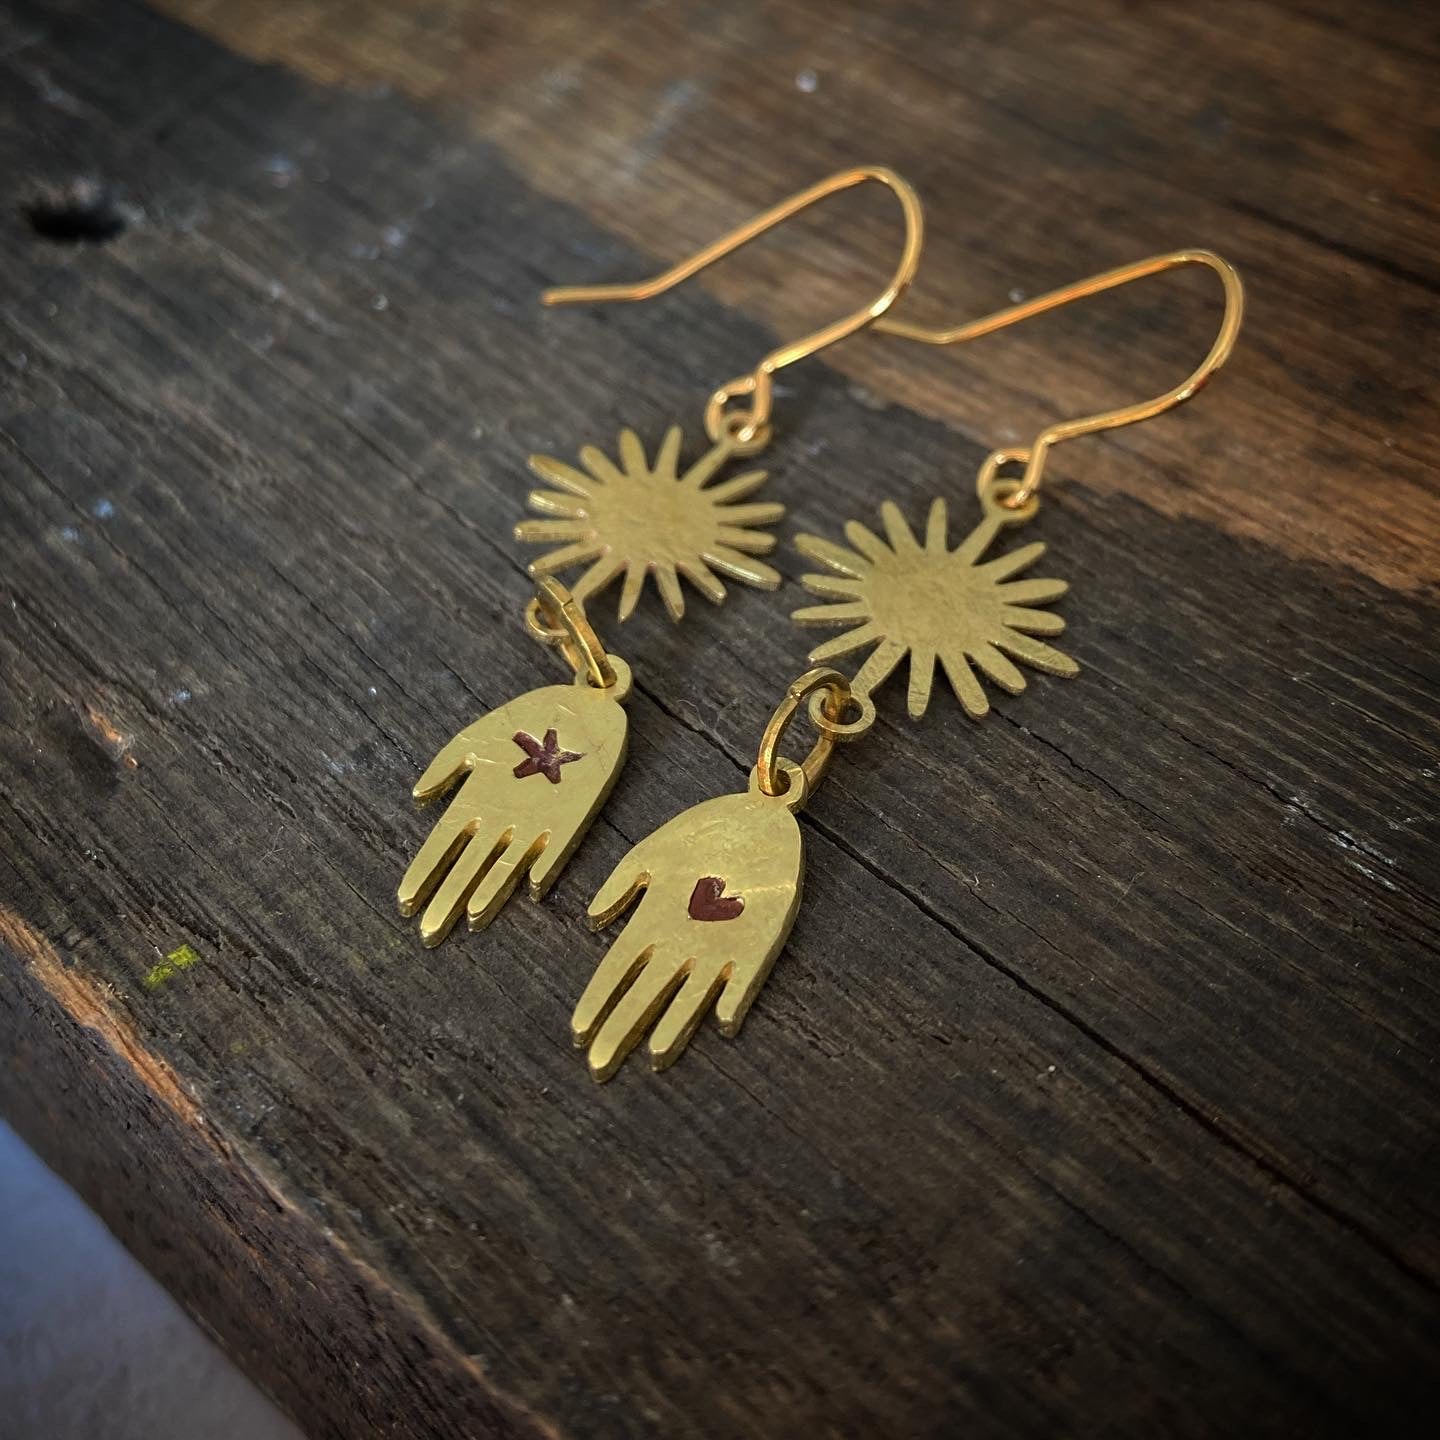 BESTOWAL Gold Brass Hand Earrings with Suns, Heart, and Star